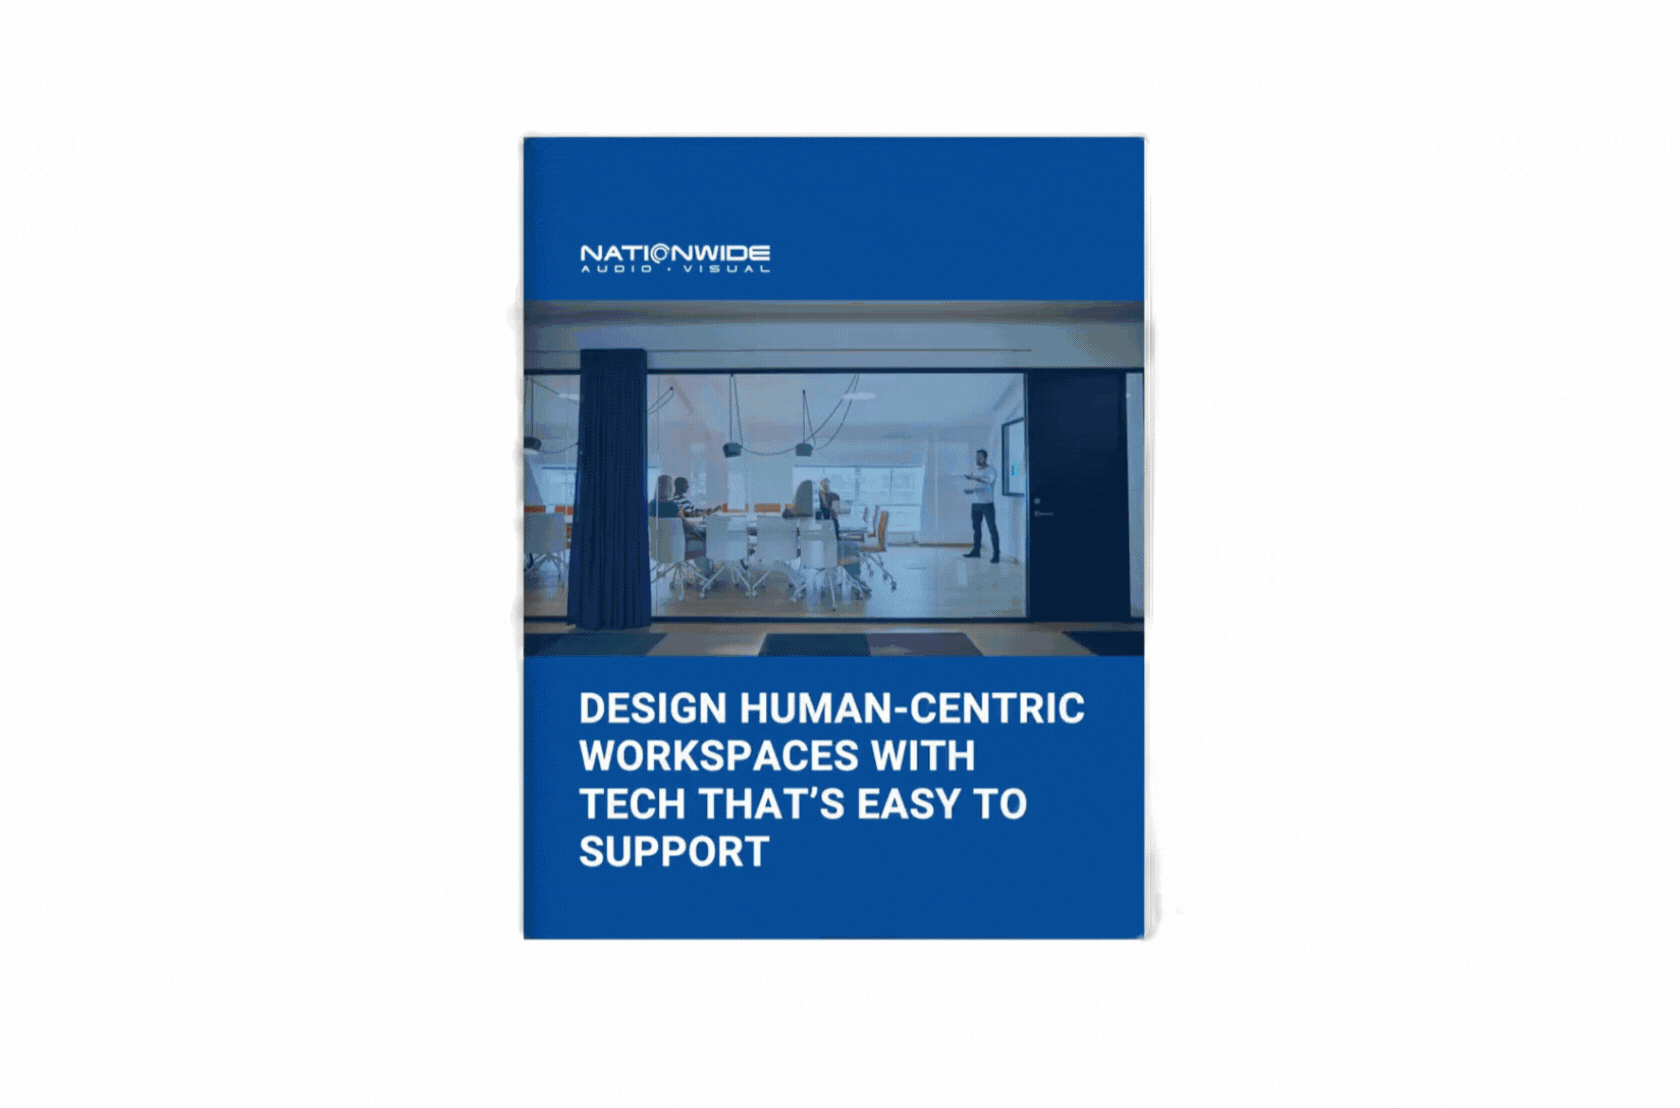 Animated thumbnail image of the Design Human-Centric Workspaces with Tech That's Easy to Support guide.